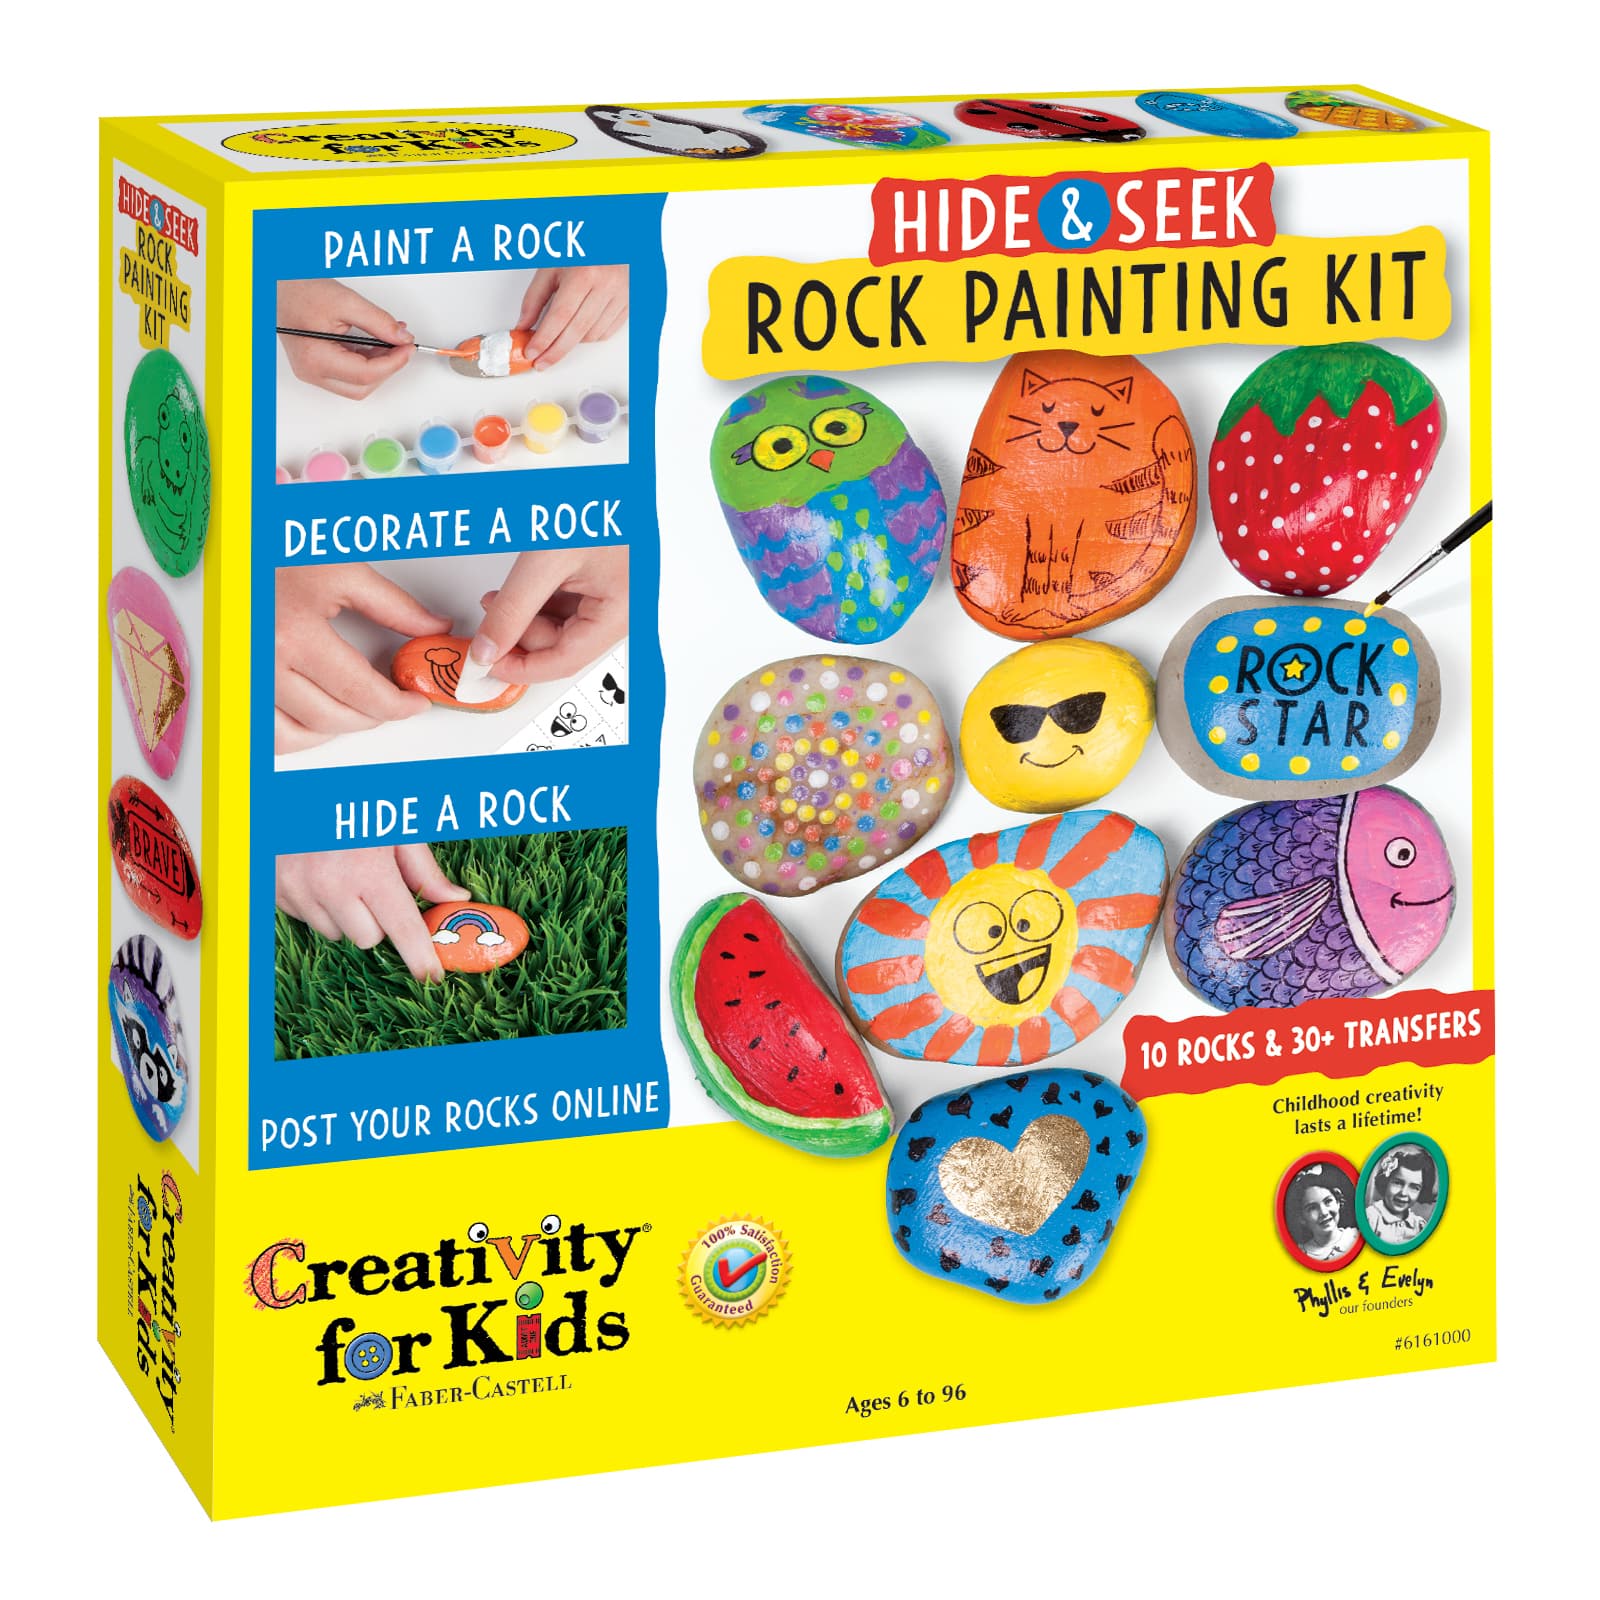 painting kits for children